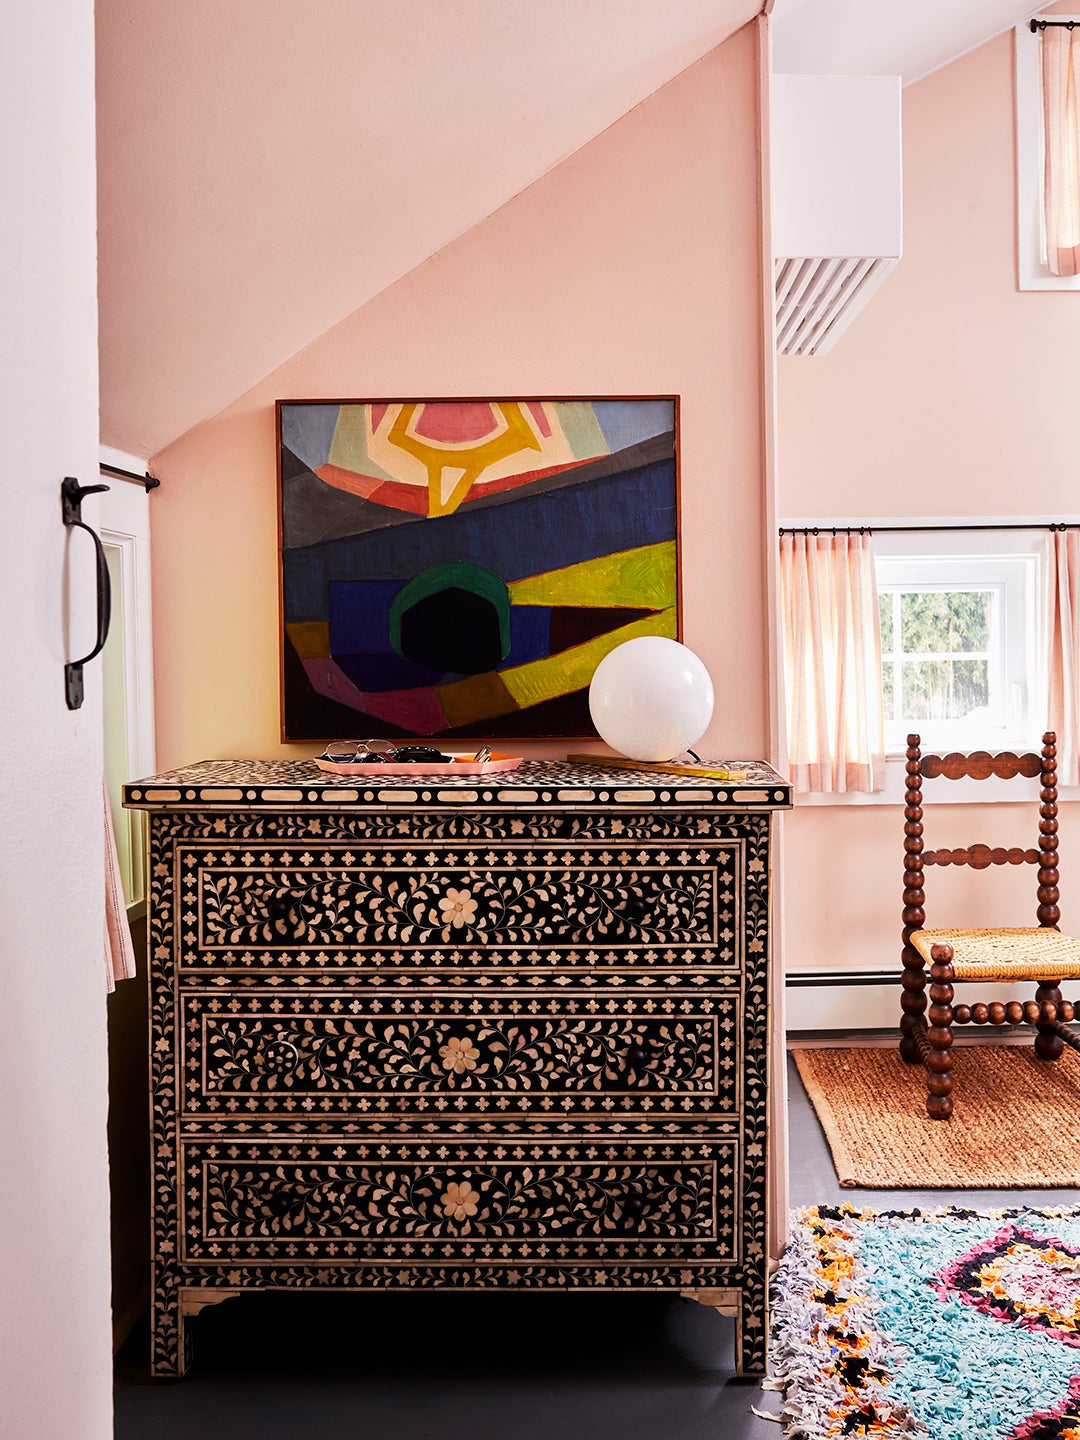 inlay dresser with abstract art above